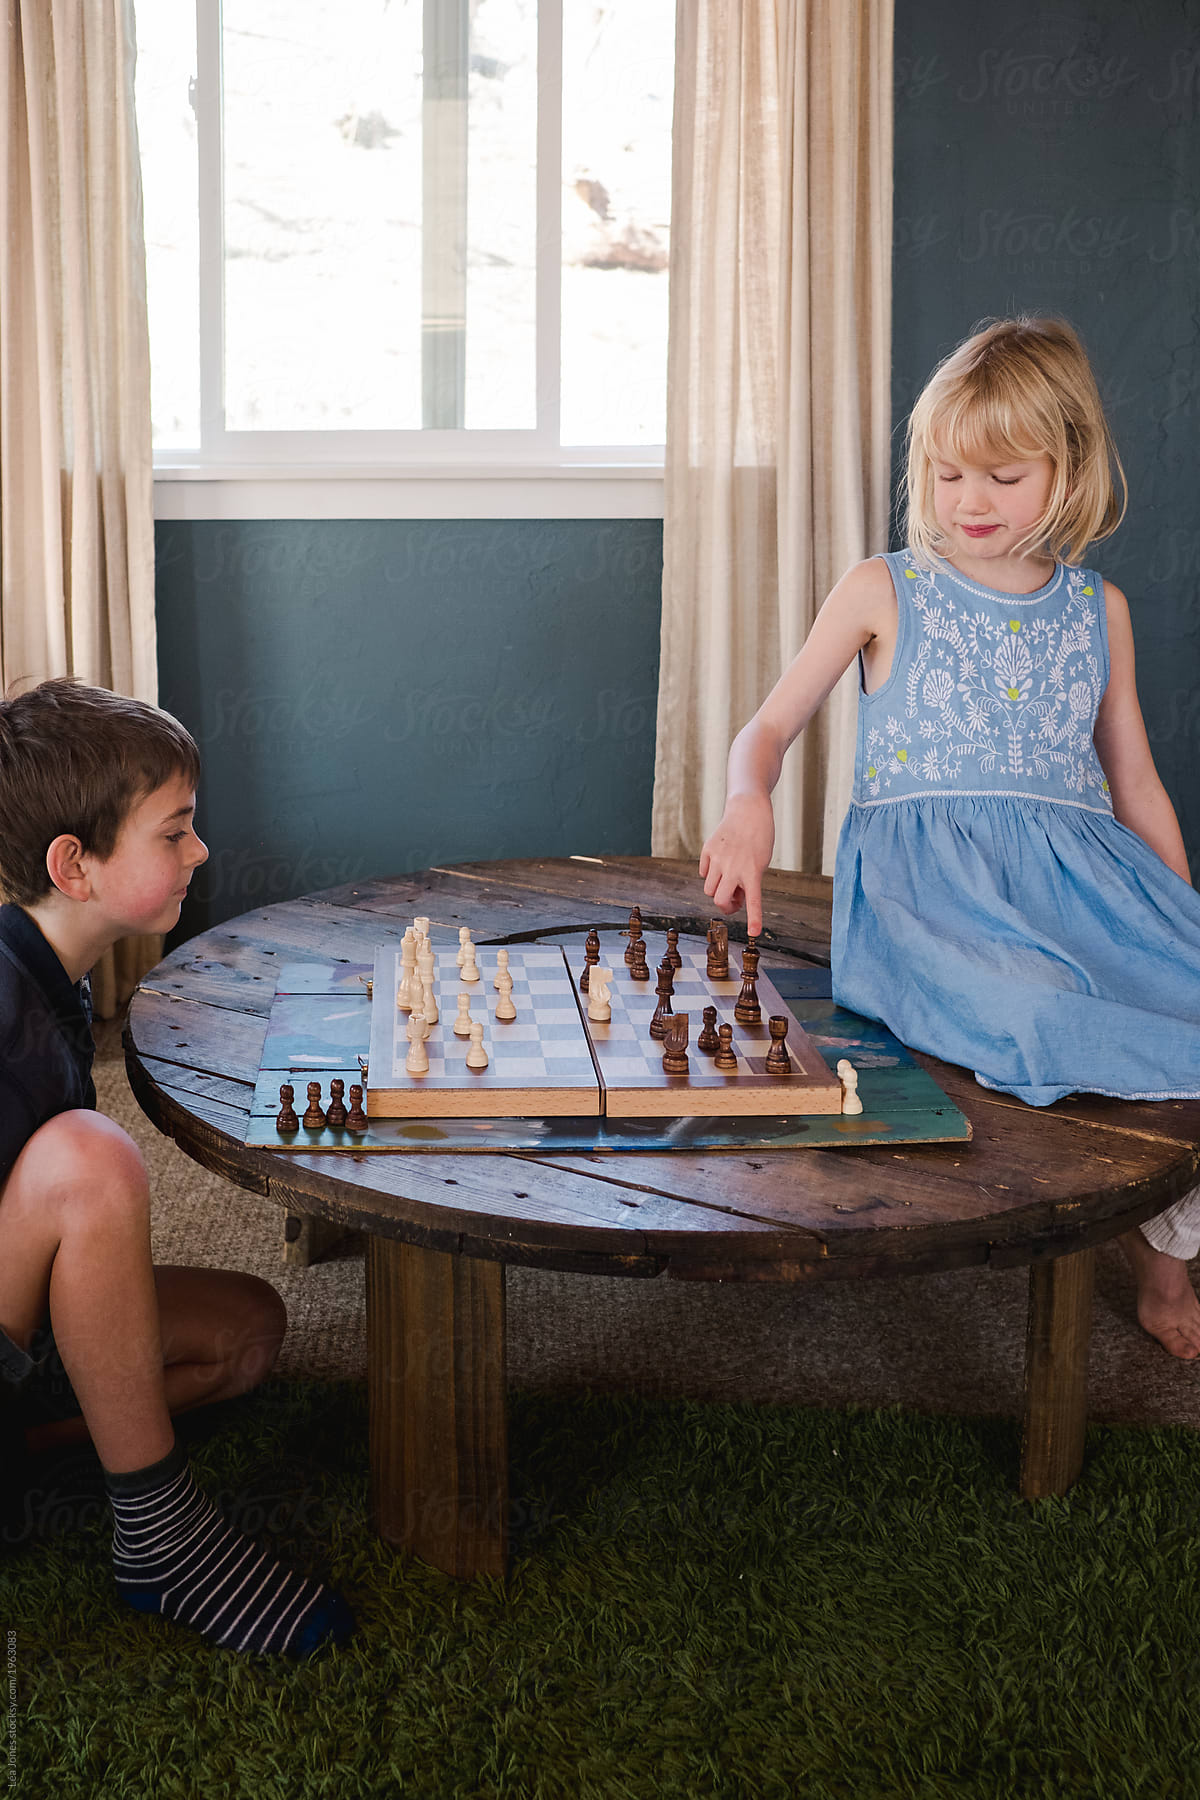 kids playing a game of chess, little girl pointing to a piece of the game.